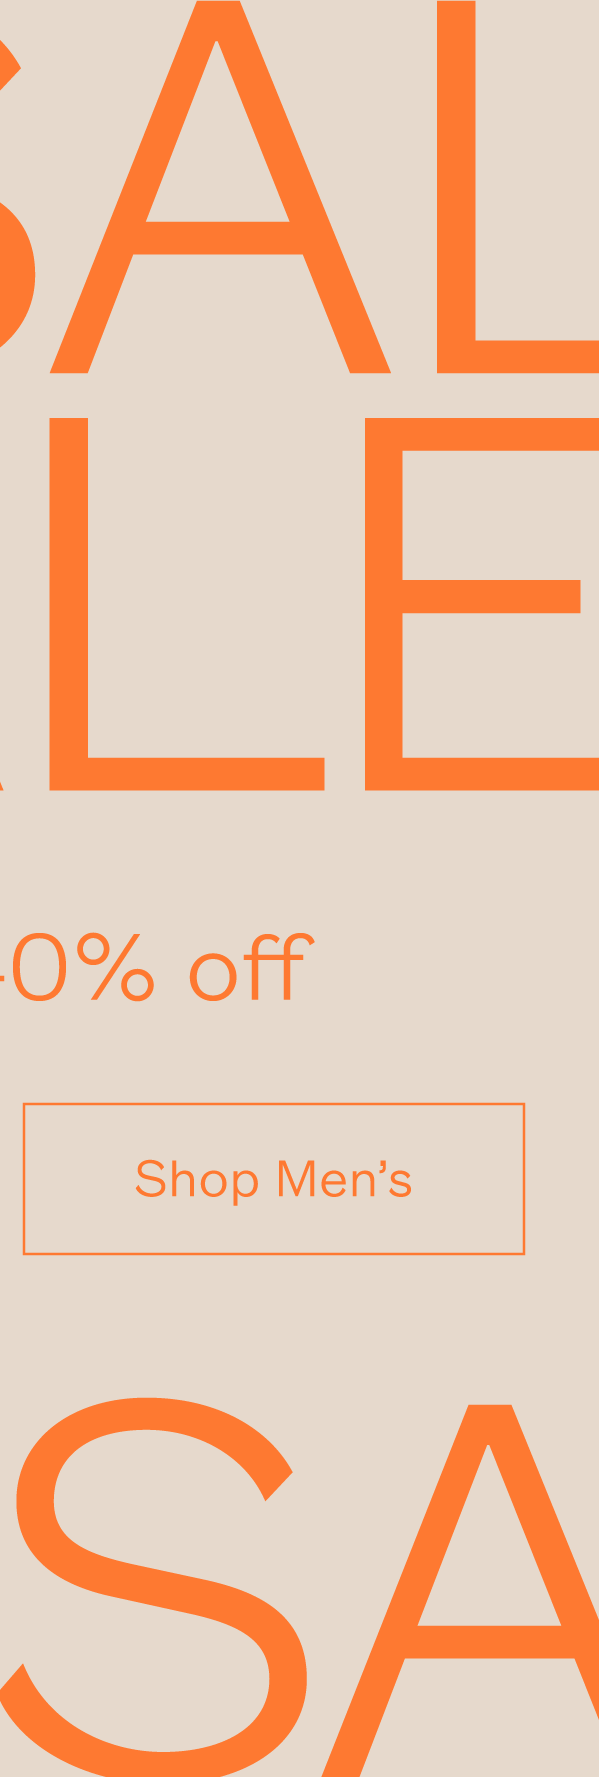 Sale on now: up to 40% off. Shop men''s